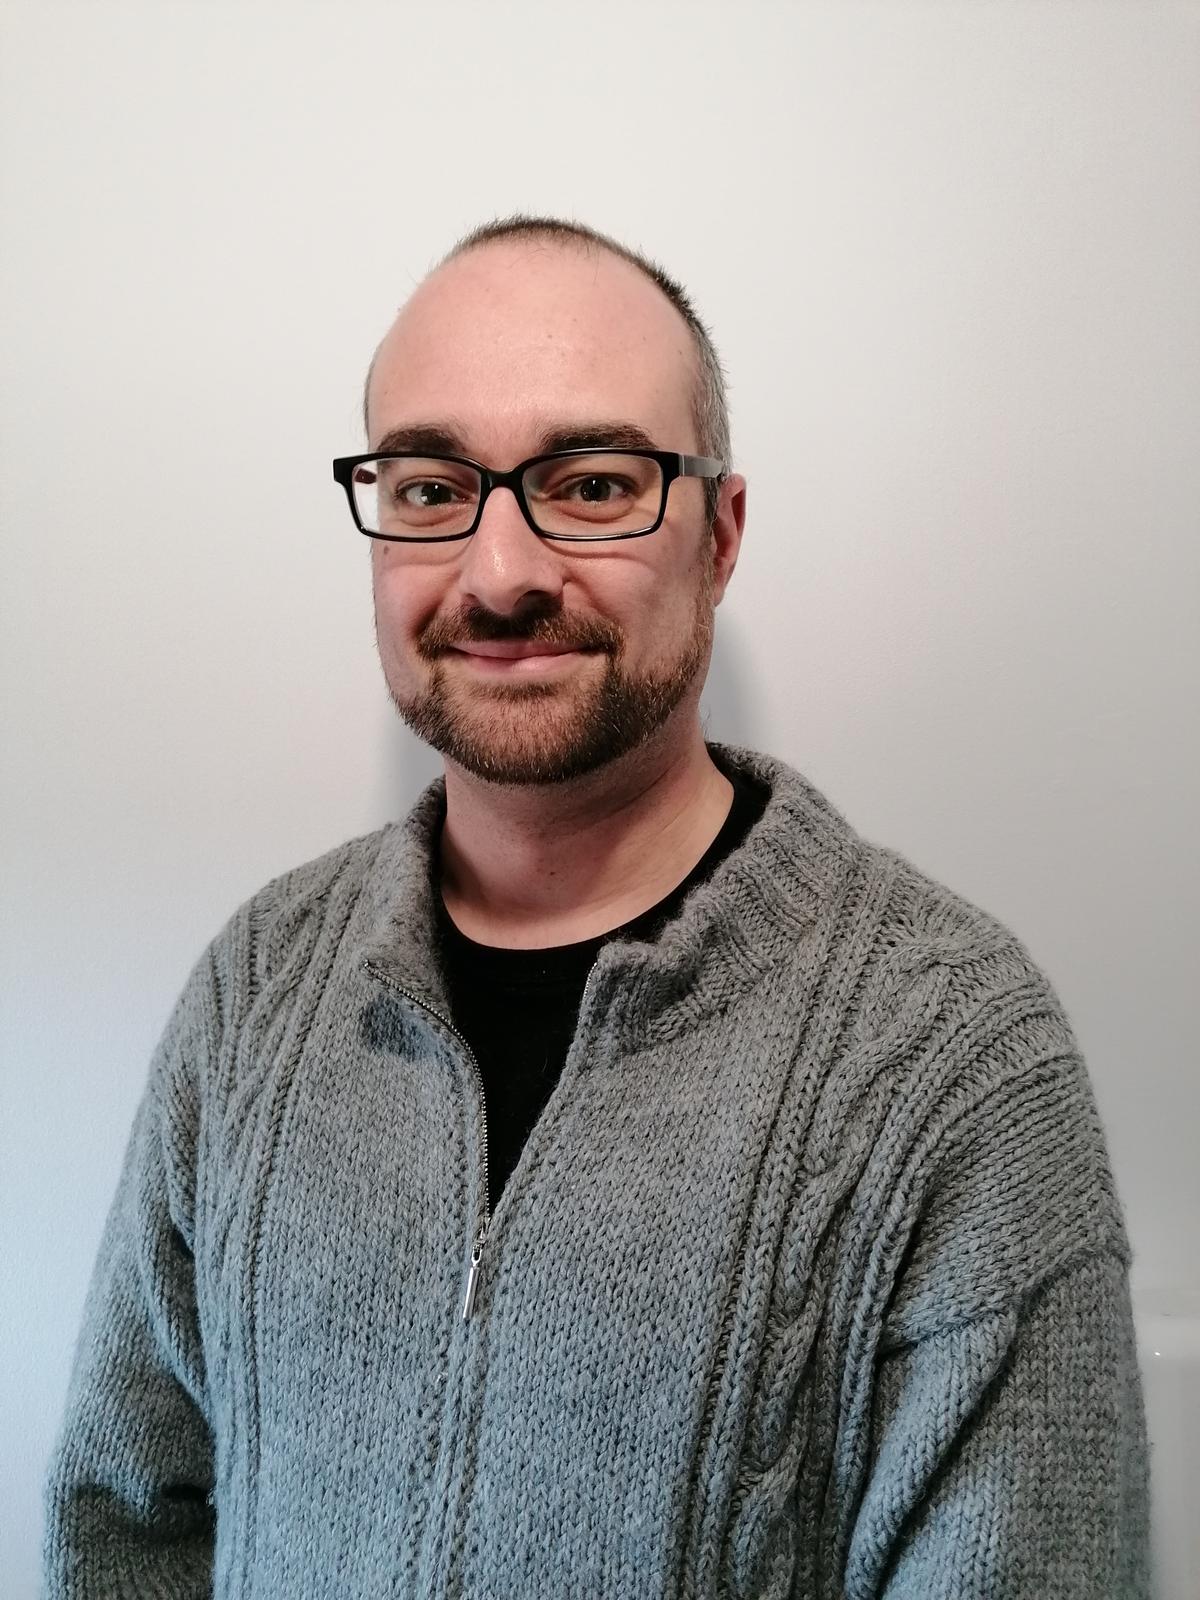 Picture of a (cute) caucasian white balding male with glasses, a trimmed beard, black t-shirt and a gray homemade sweater